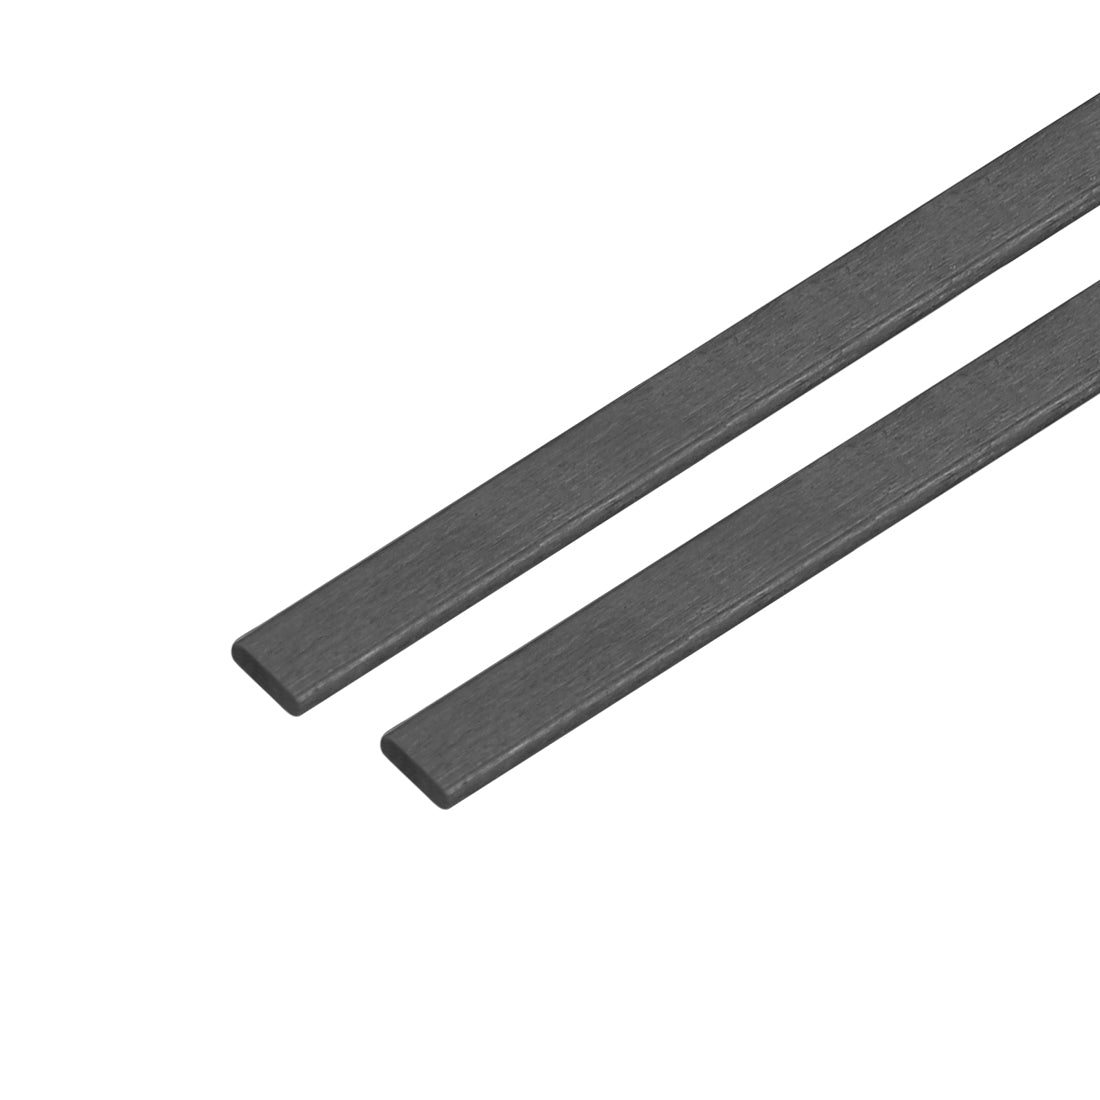 uxcell Uxcell Carbon Fiber Strip Bars 1x3mm 400mm Length Pultruded Carbon Fiber Strips for Kites, RC Airplane 2 Pcs